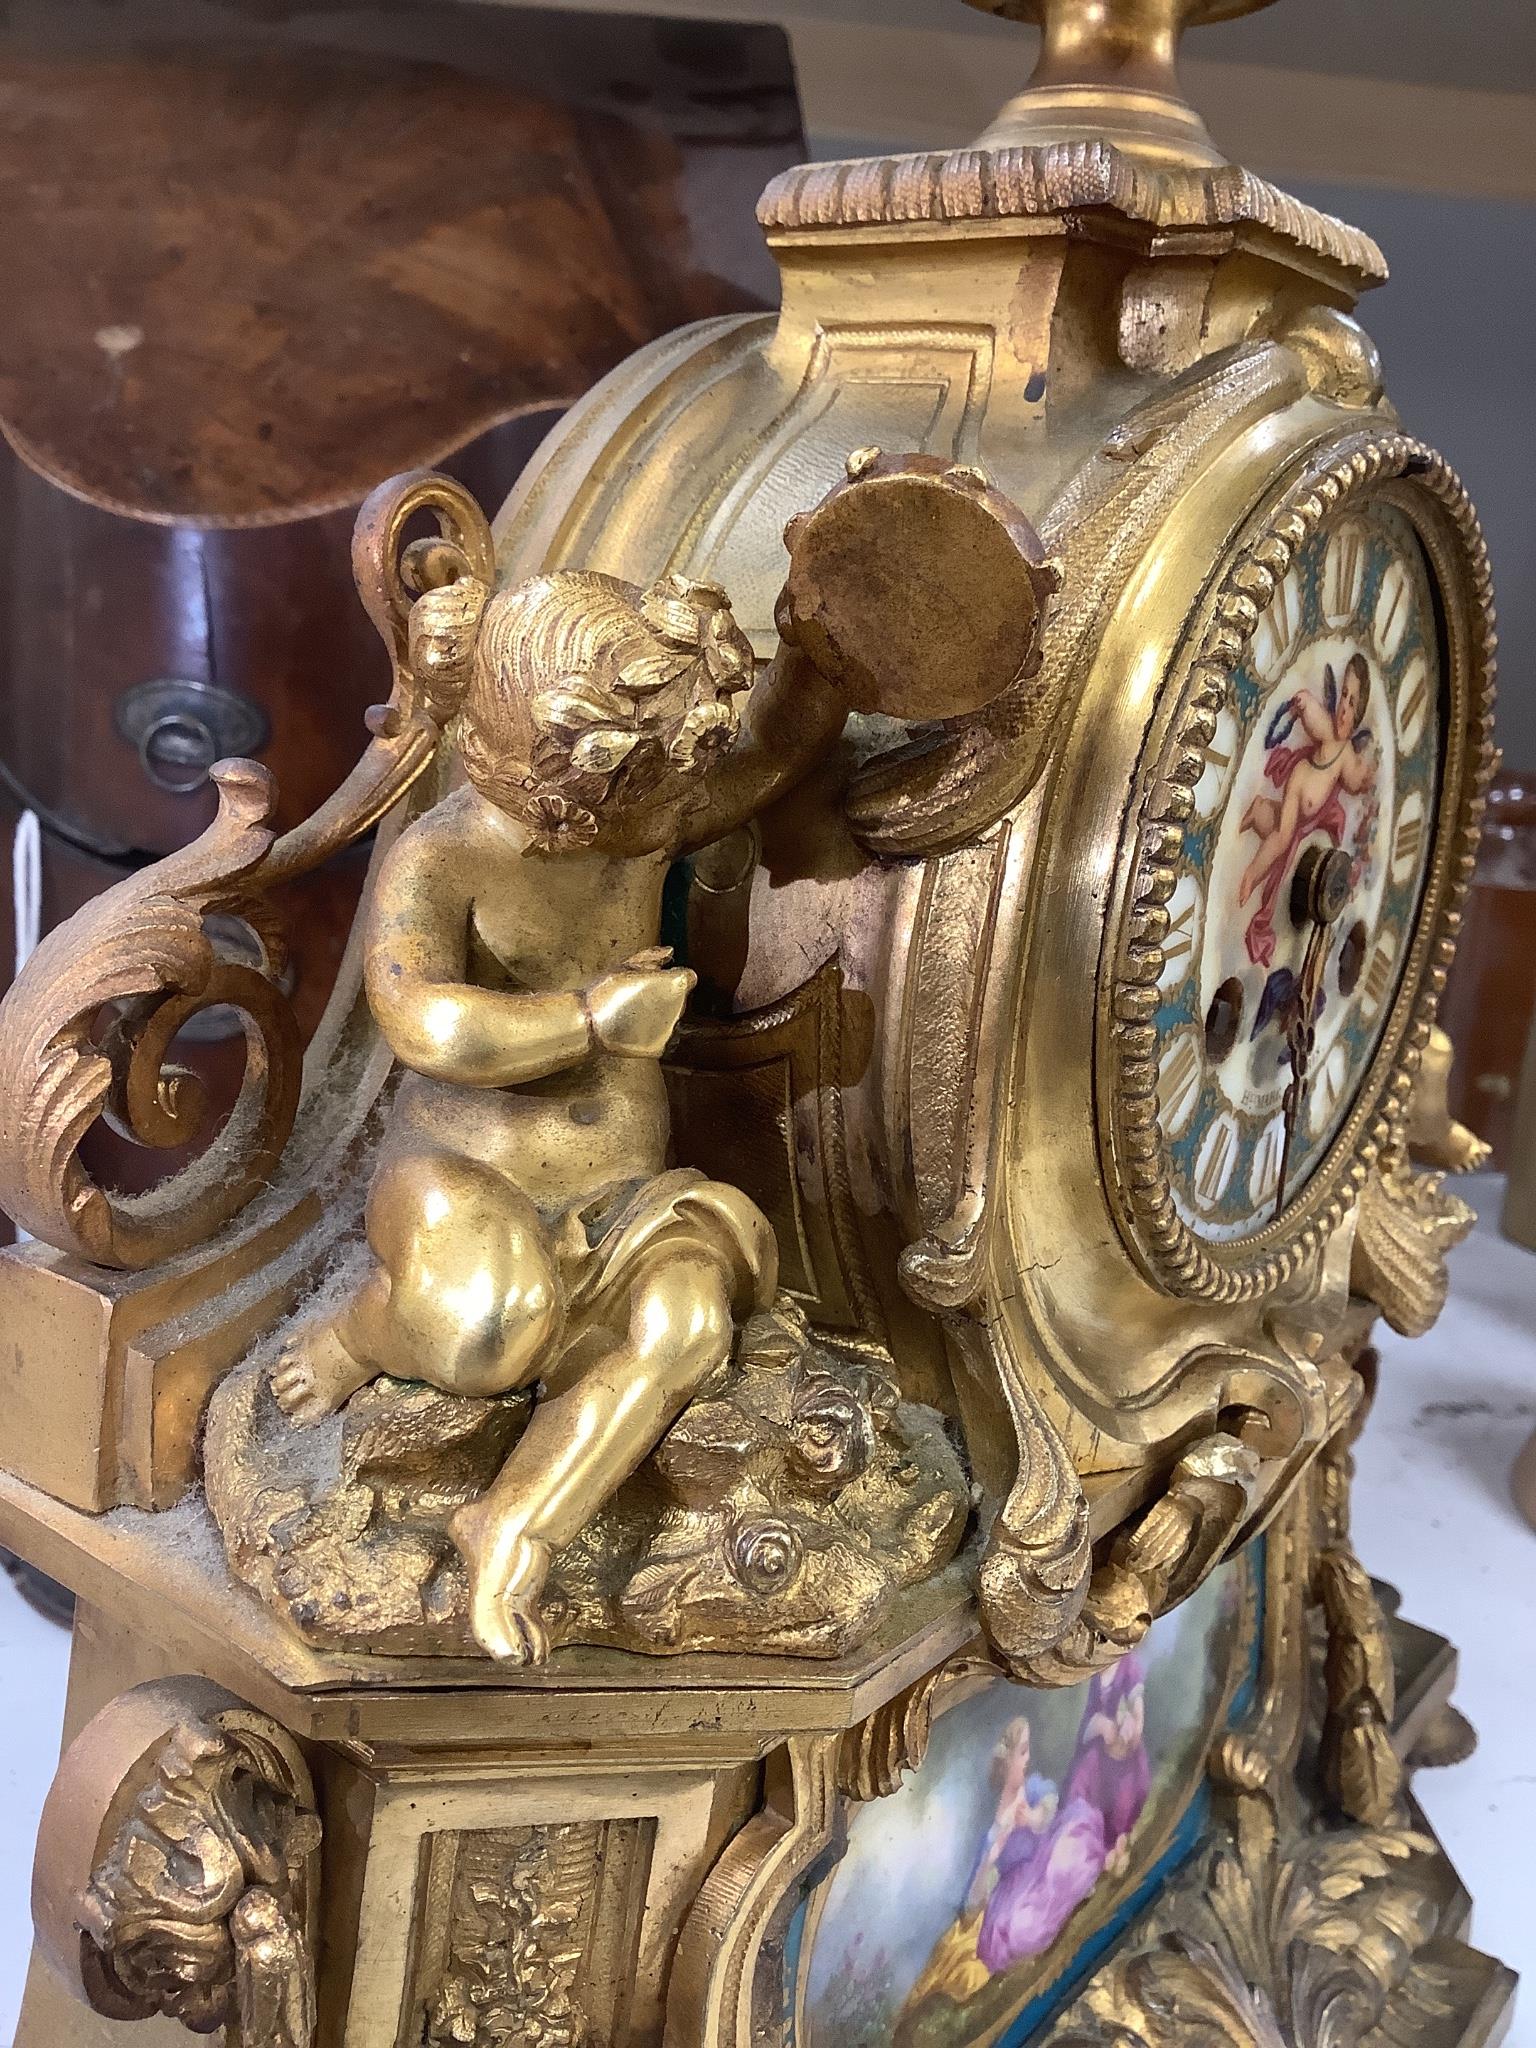 A 19th century French ormolu and Sevres style porcelain mounted mantel clock, with key and pendulum, 35 cm high